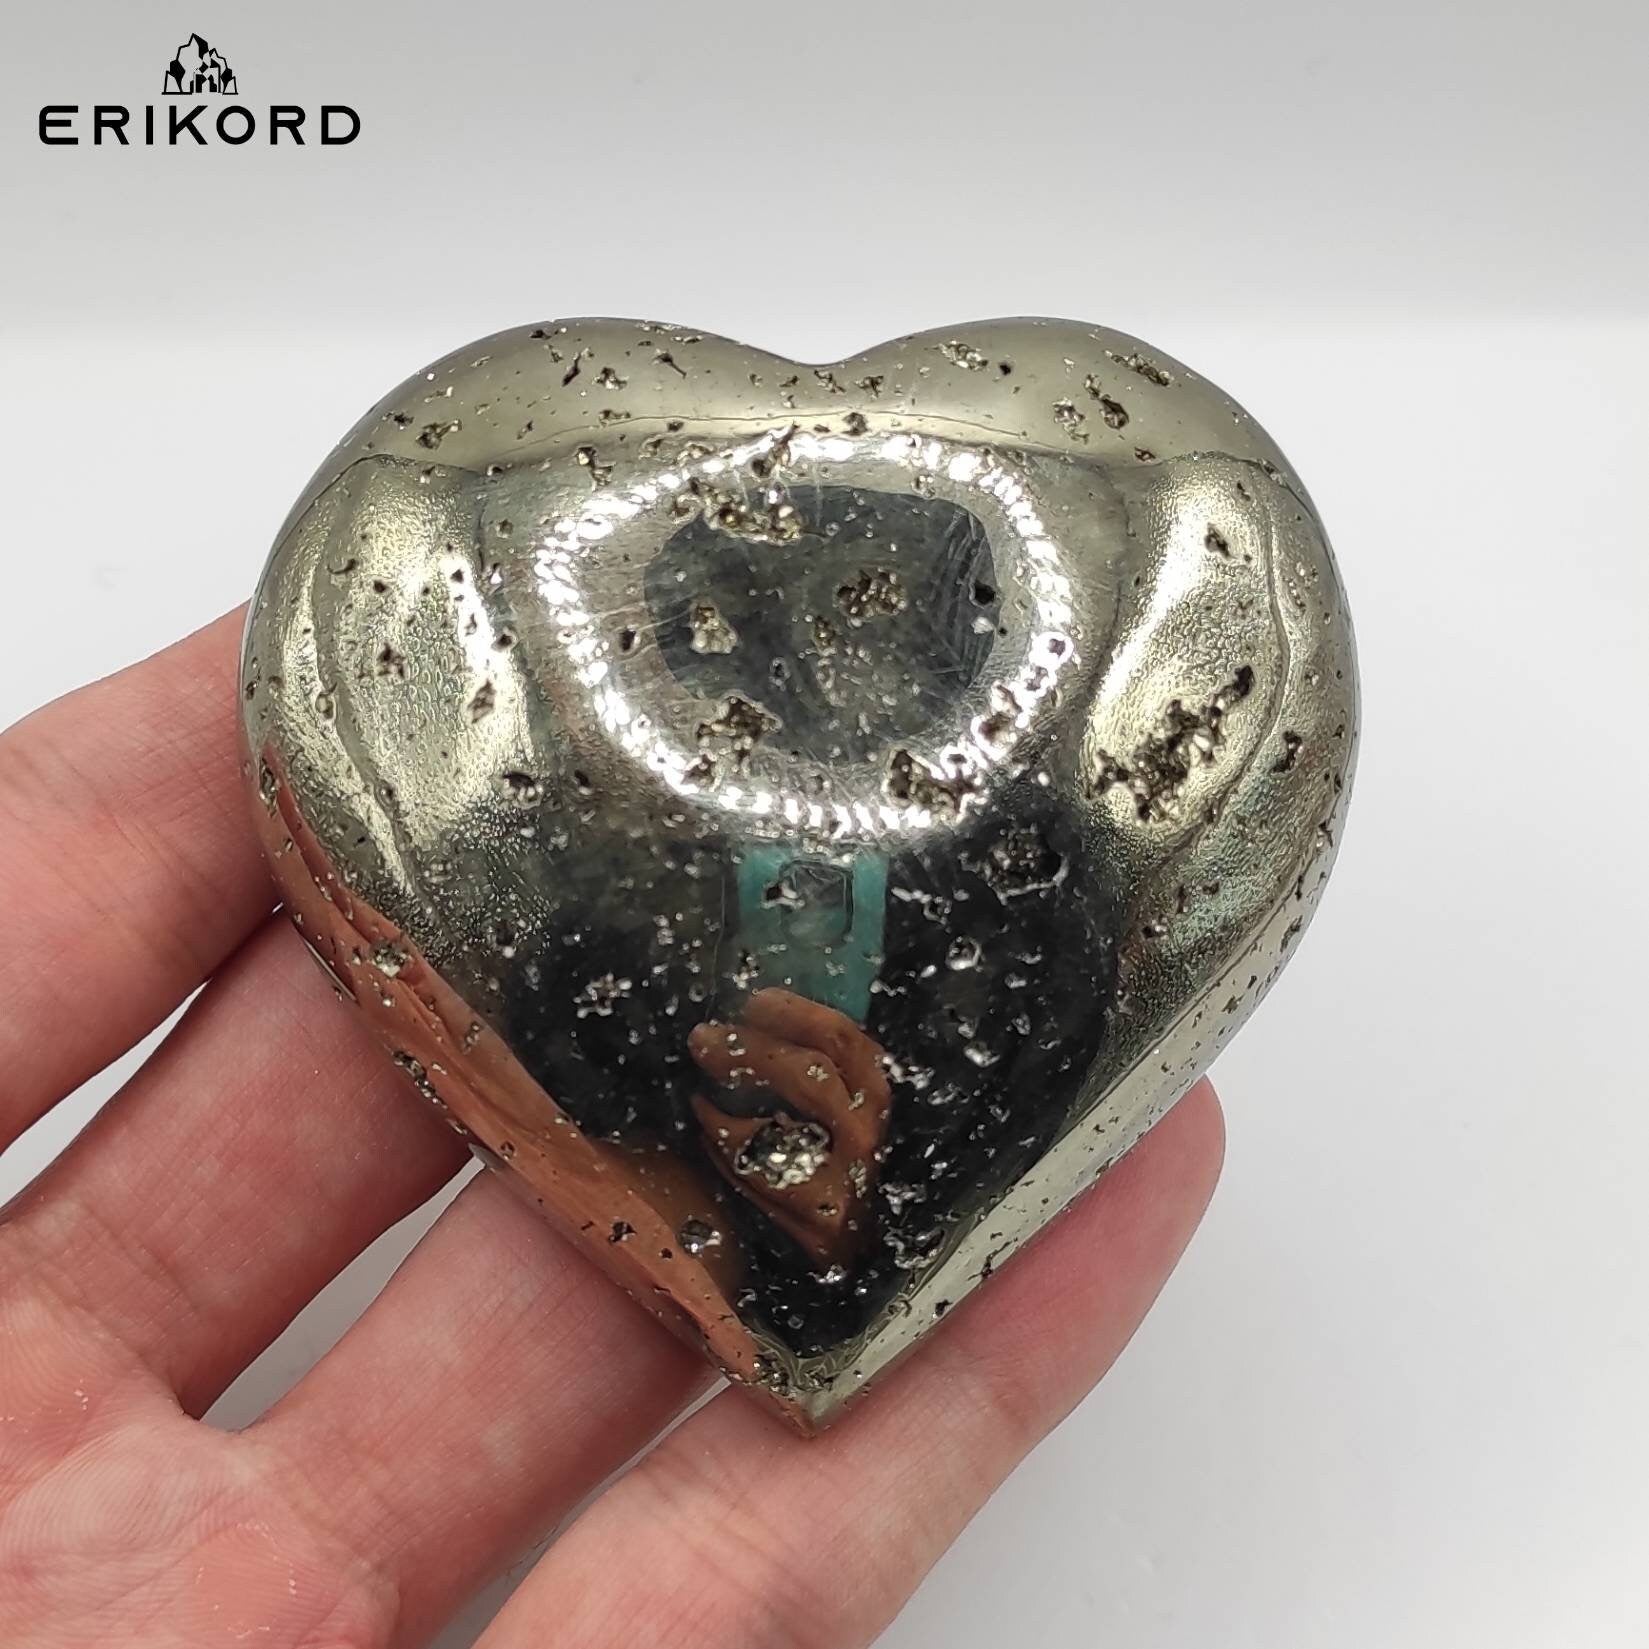 272g Pyrite Heart from Peru - Polished Crystal Heart - Polished Mineral Specimen - Natural Pyrite Mined and Polished in Peru - Silver Pyrite